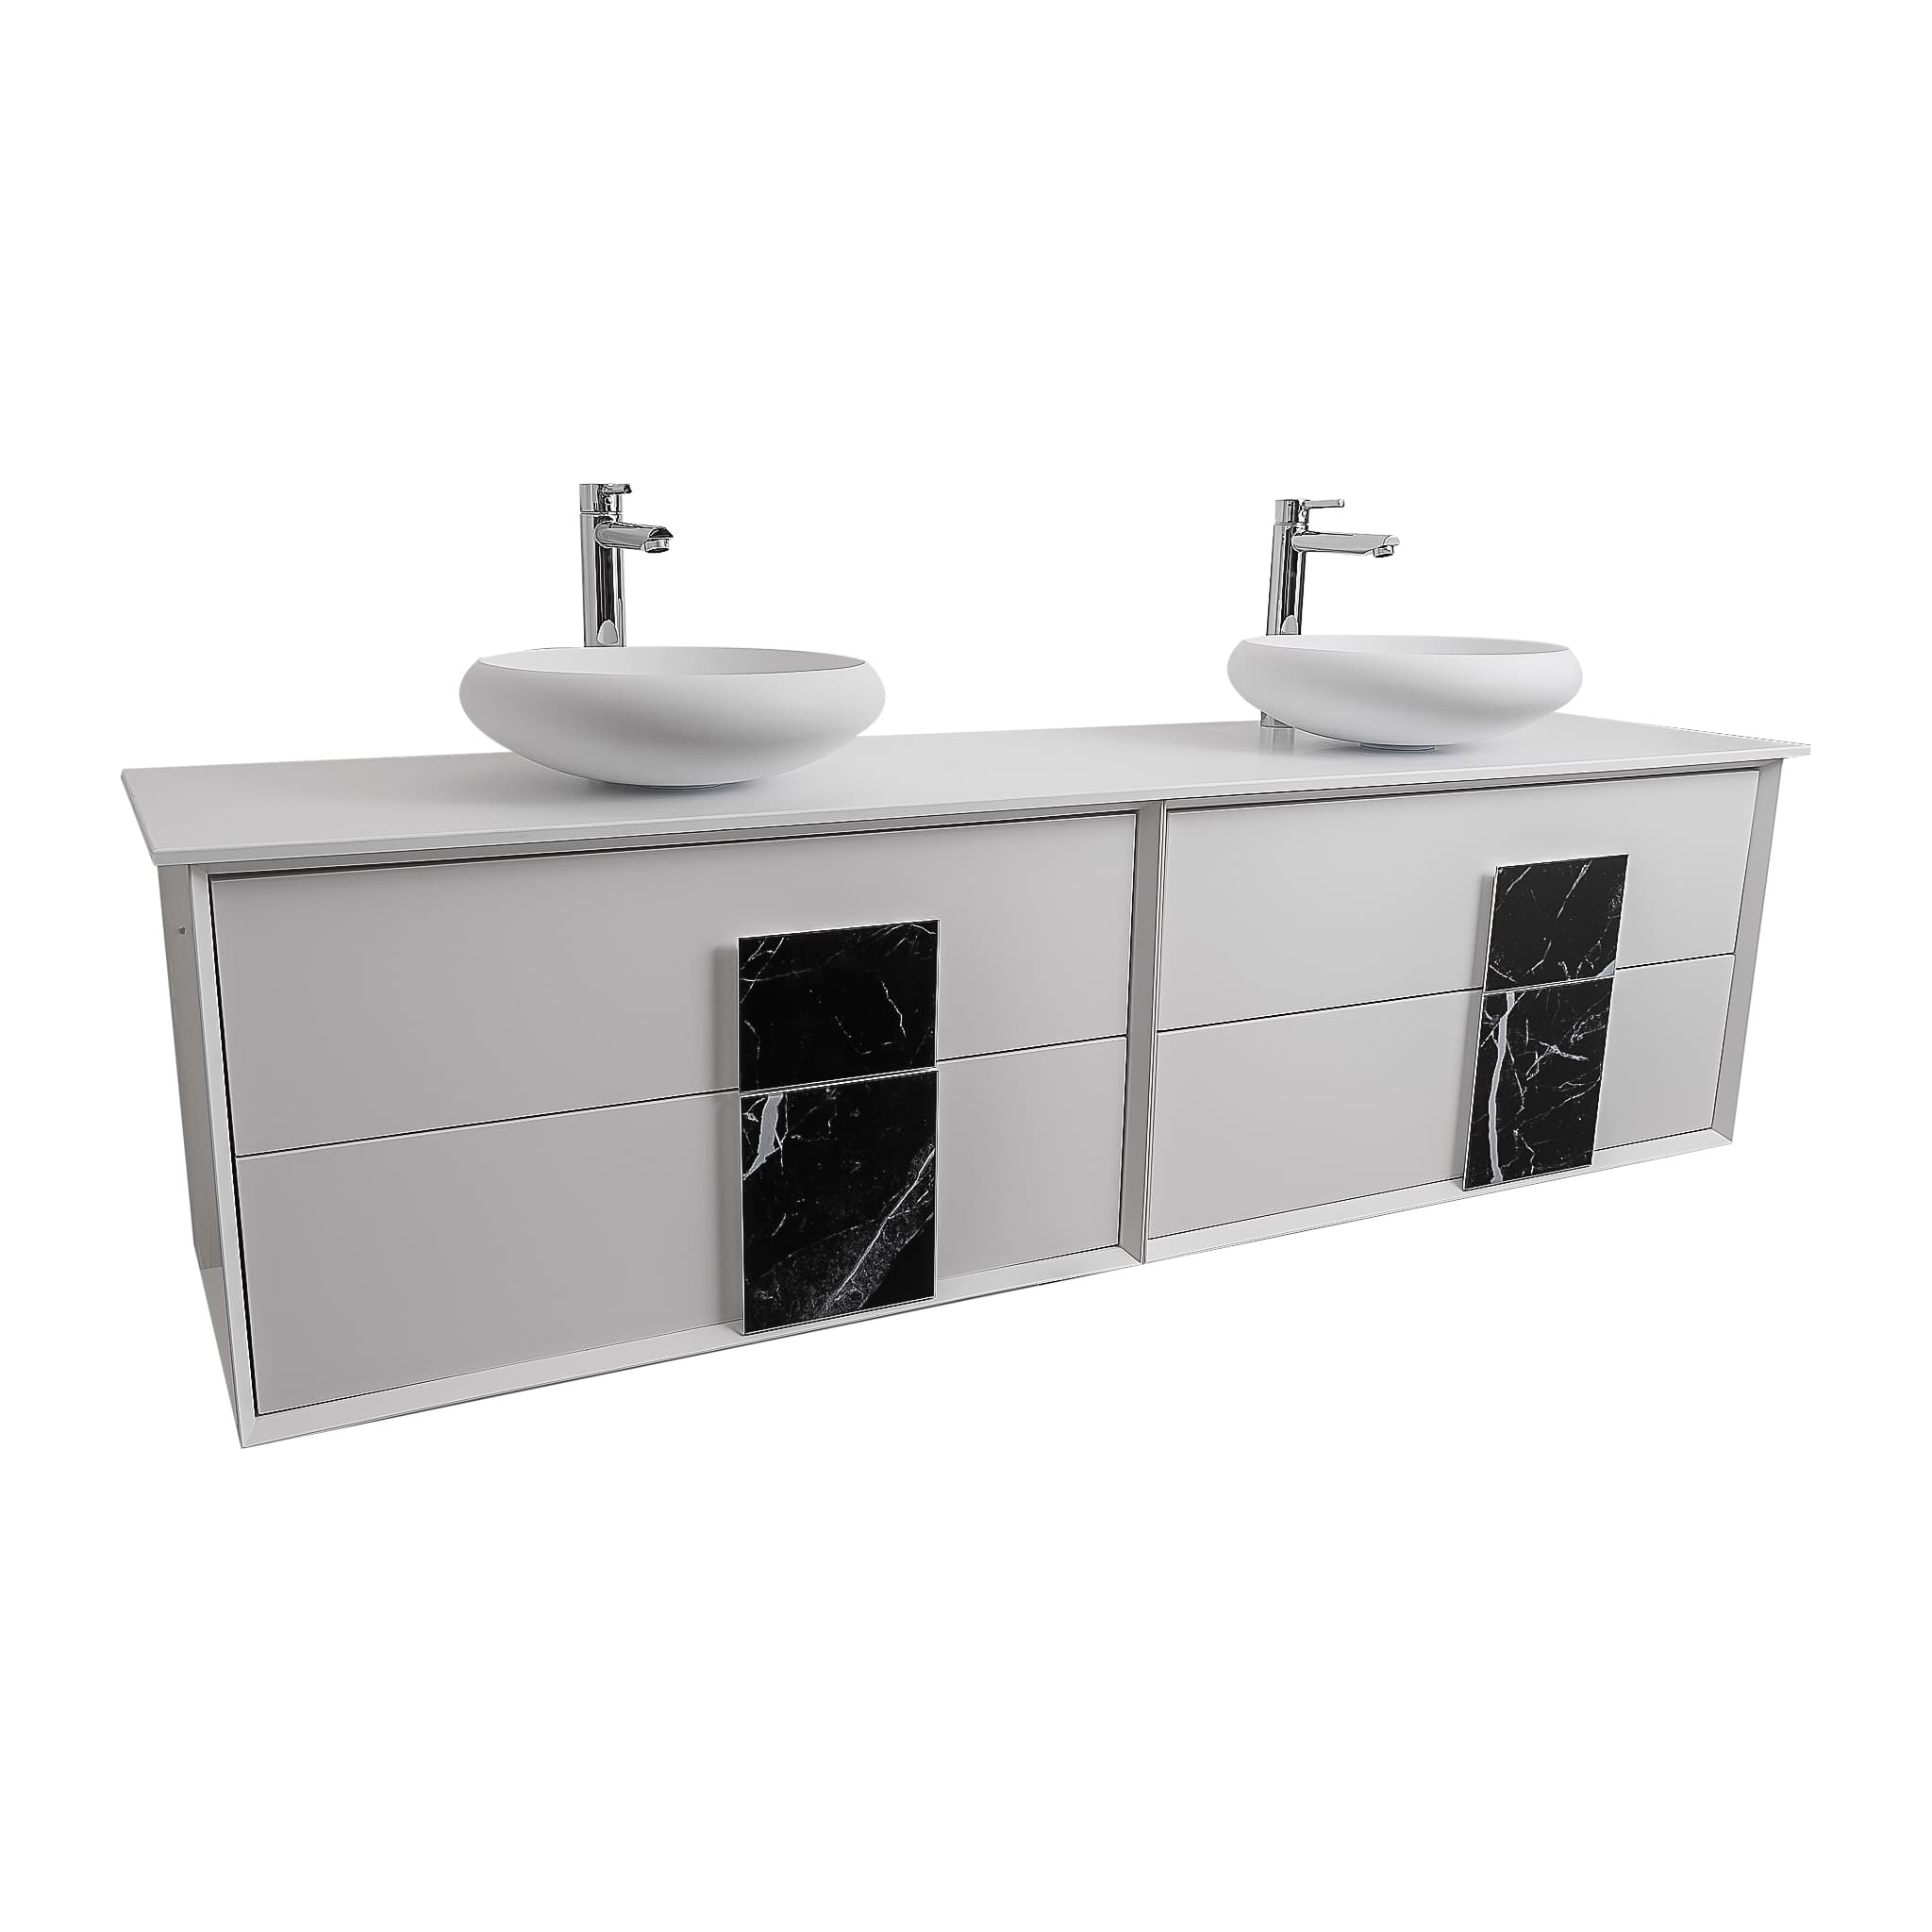 Piazza 63 Matte White With Black Marble Handle Cabinet, Solid Surface Flat White Counter and Two Round Solid Surface White Basin 1153, Wall Mounted Modern Vanity Set